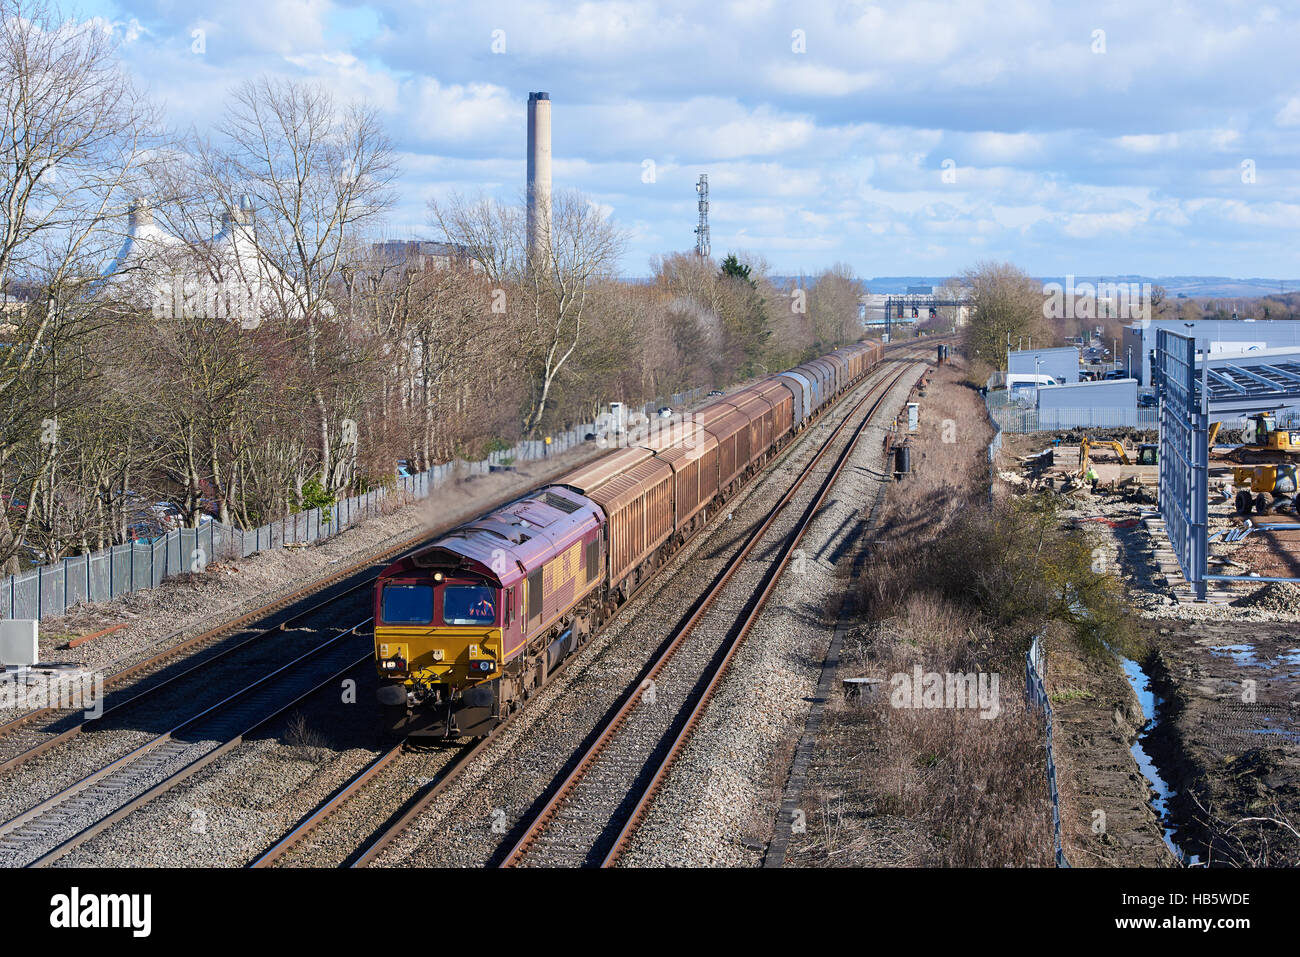 DBS Class 66 No. 66161 powers through Milton, Dicot on the Great Western Mainline with 6V47 10:26 Tilbury to Trostre imported steel on 18th Feb 2016. Stock Photo